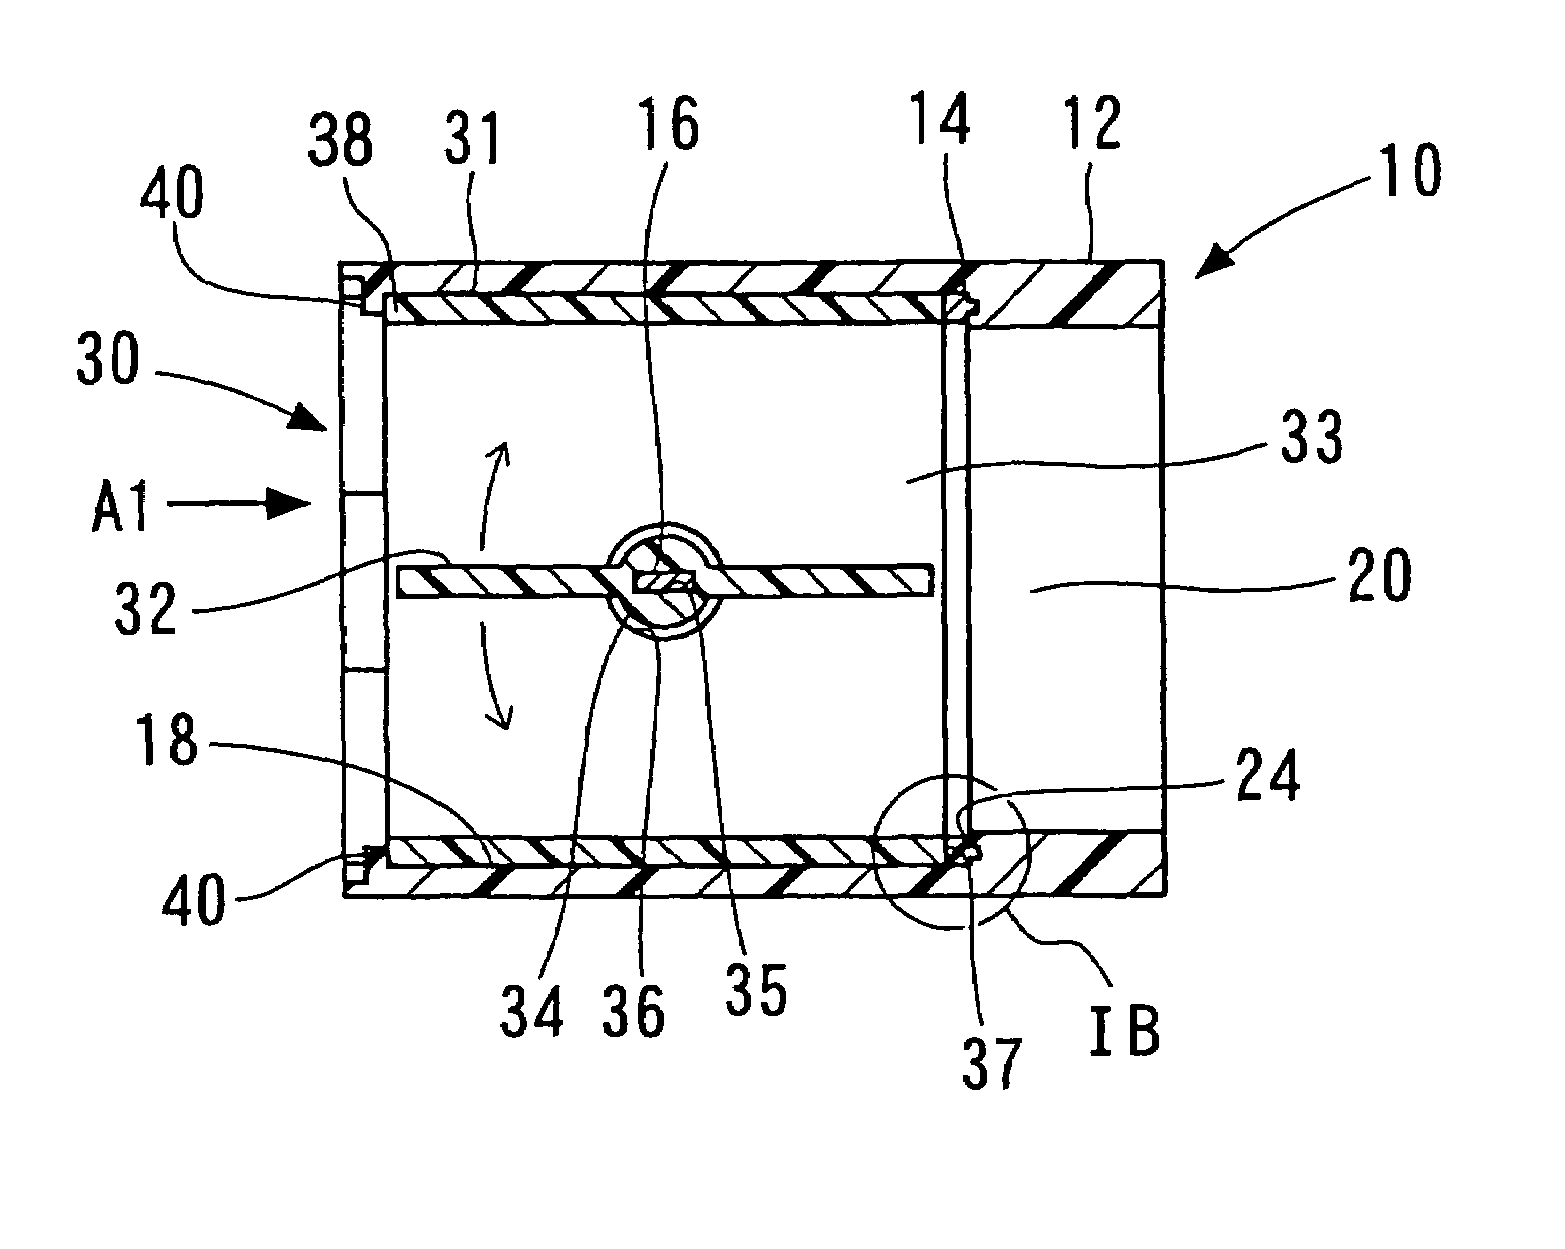 Intake device and mounting structure of valve unit